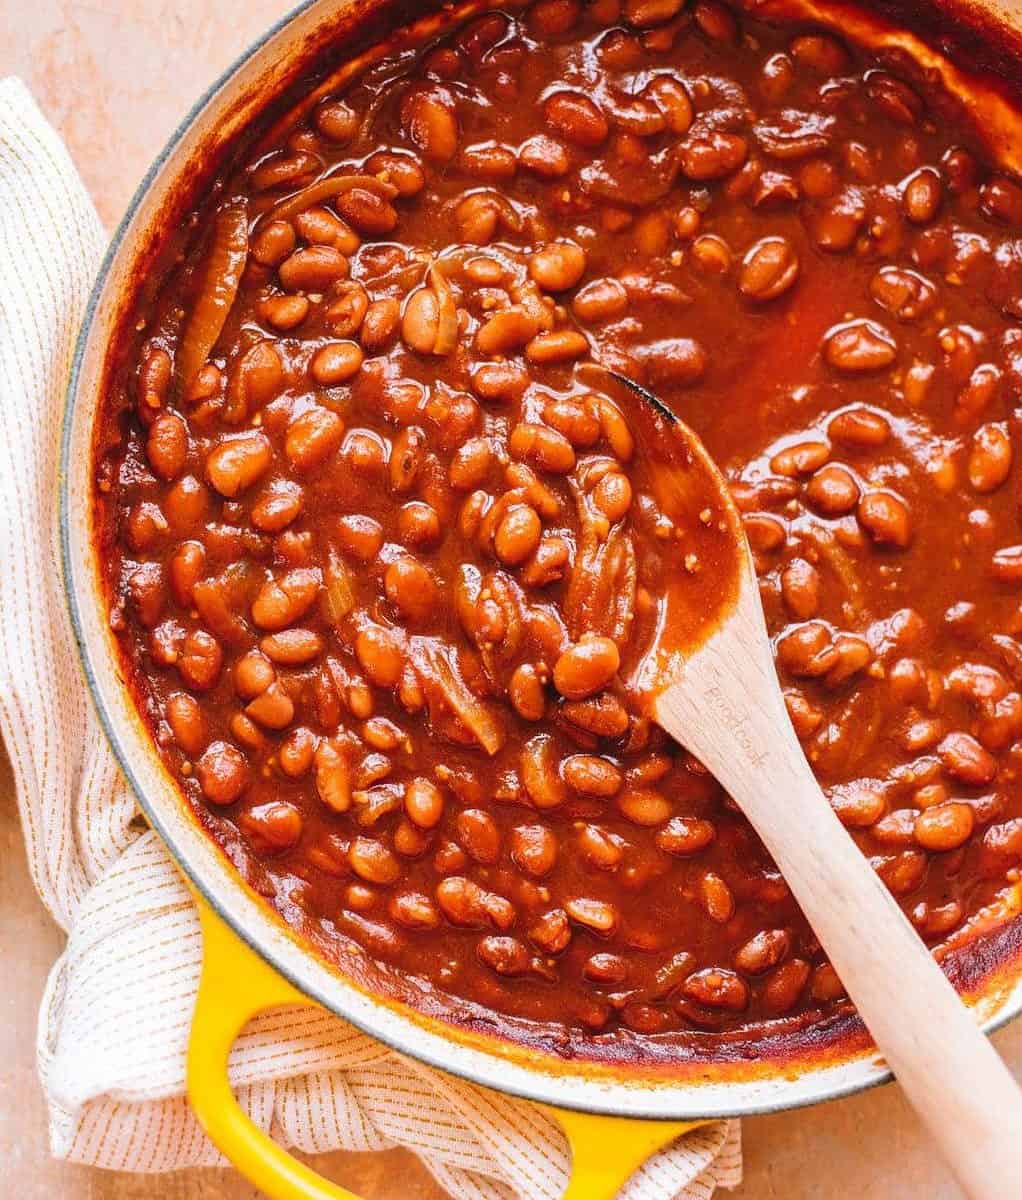  The ultimate side dish for any barbecue or picnic - these baked beans will steal the show.